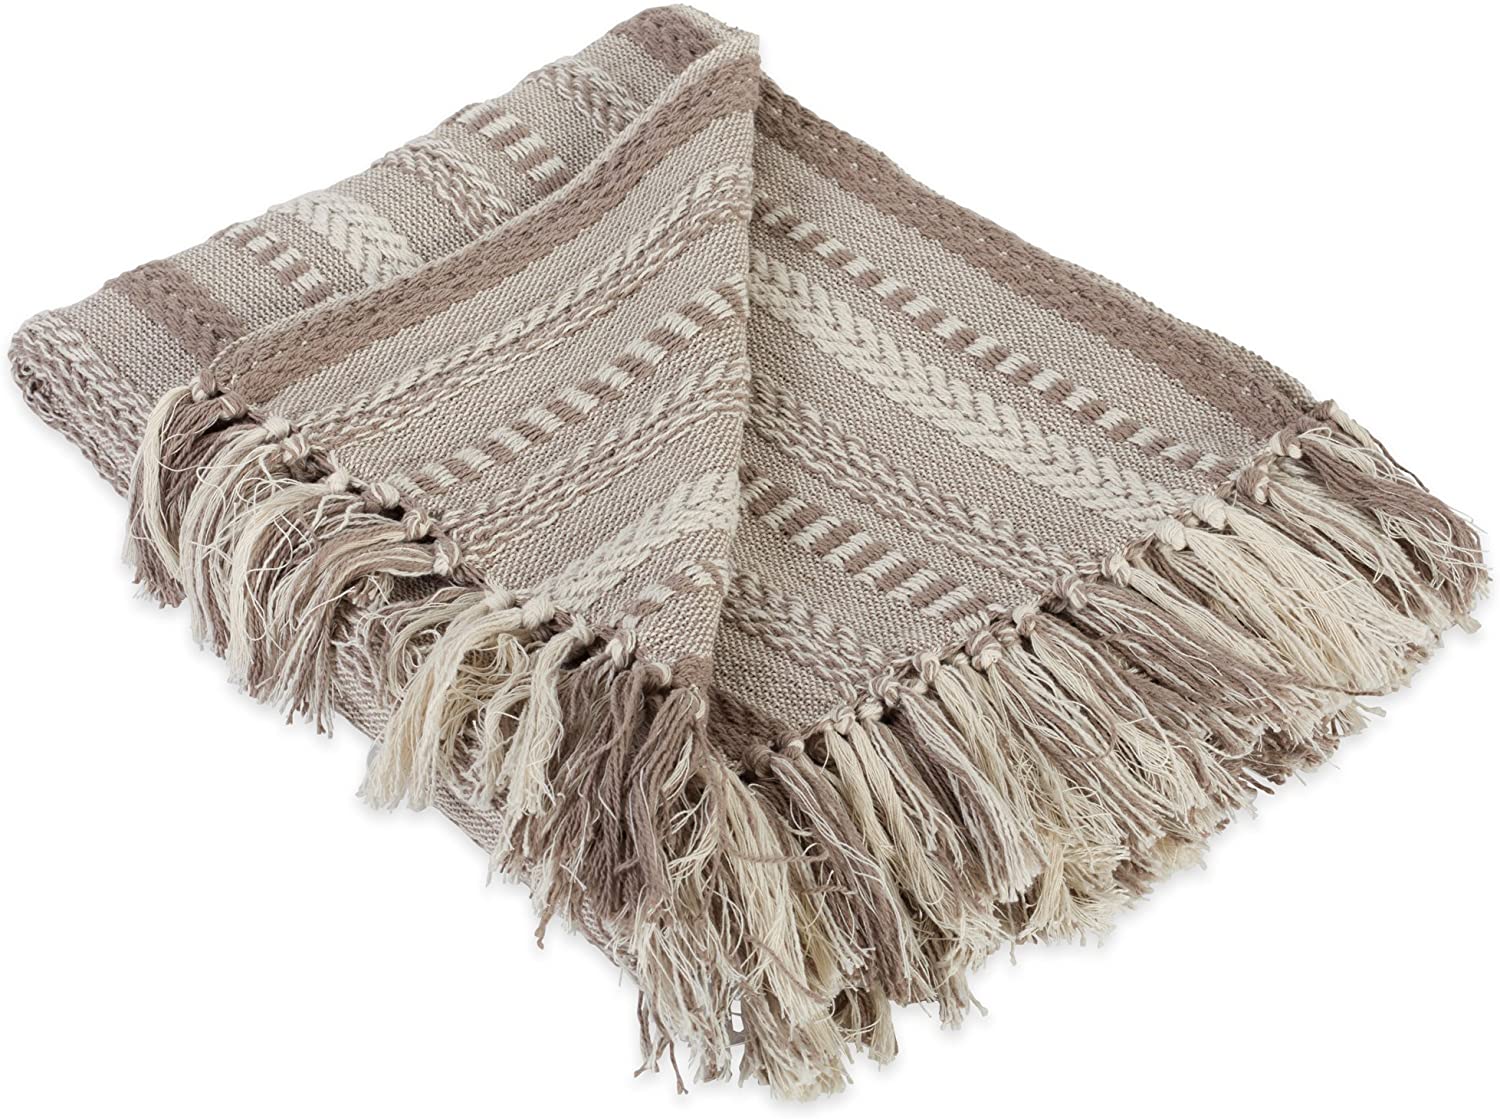 P Couch DII Rustic Farmhouse Cotton Stripe Blanket Throw with Fringe For Chair 